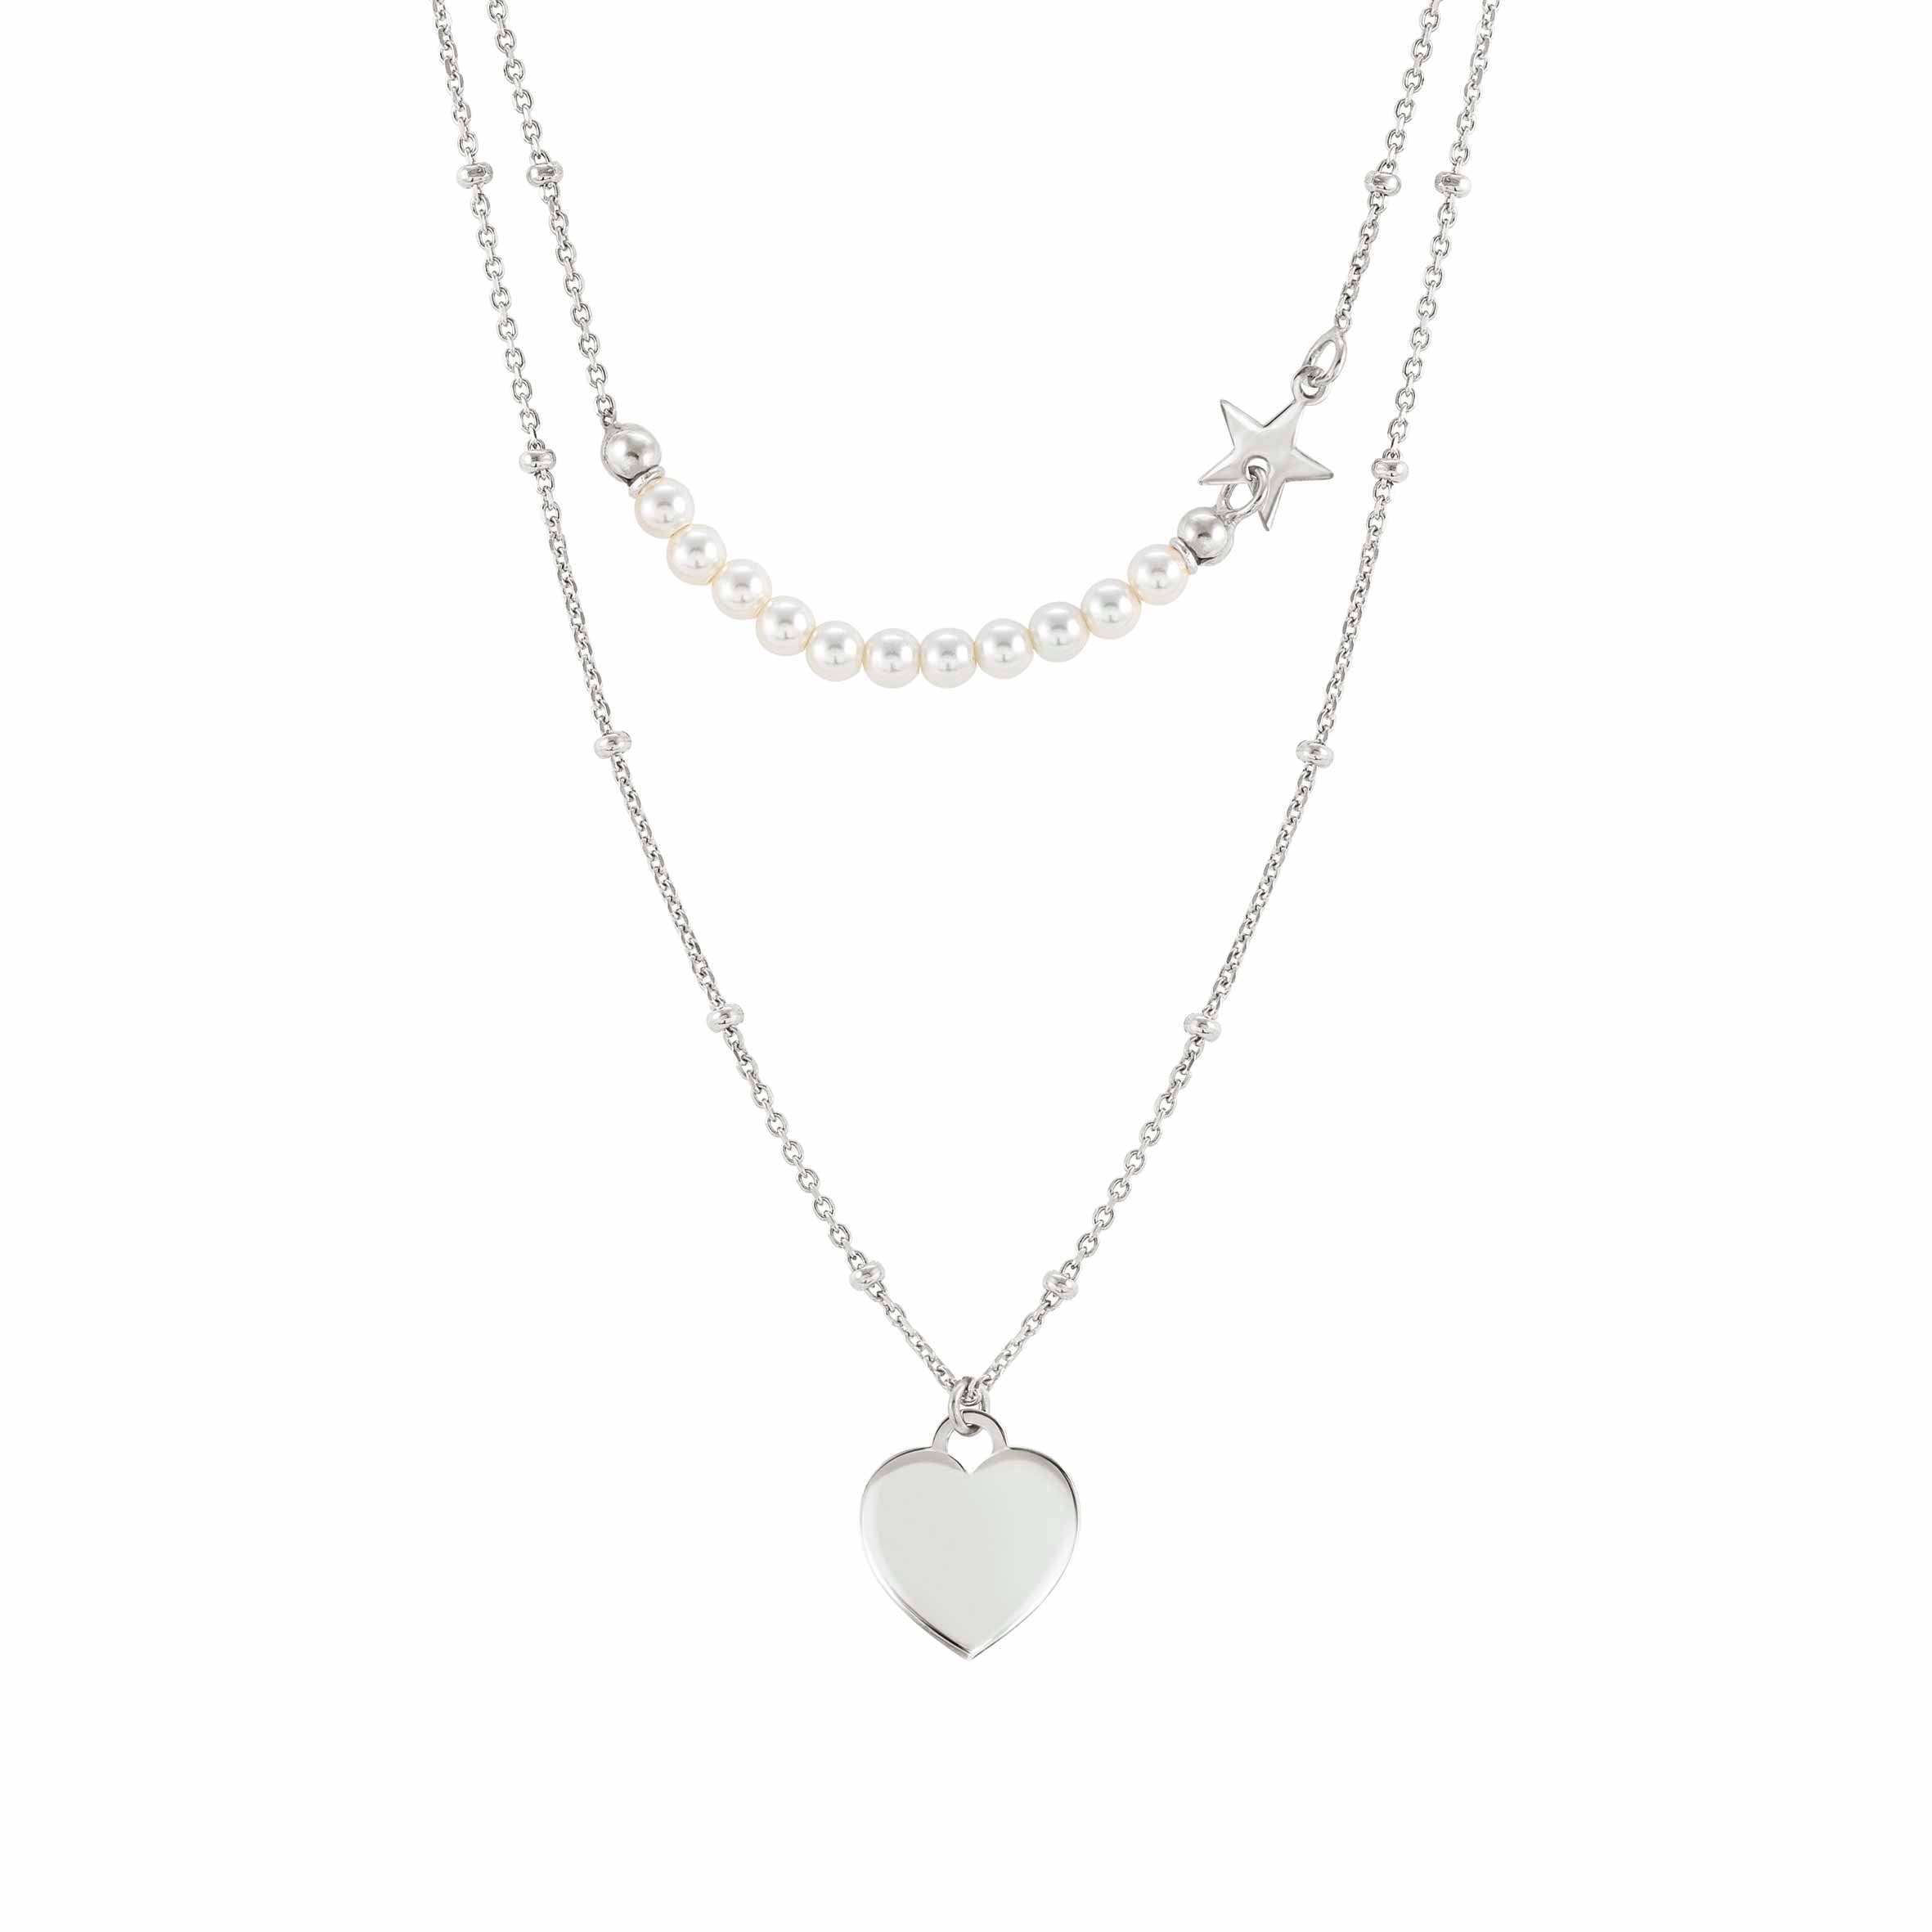 Nomination Melodie White Crystal Pearl Necklace 147711/001 Heart